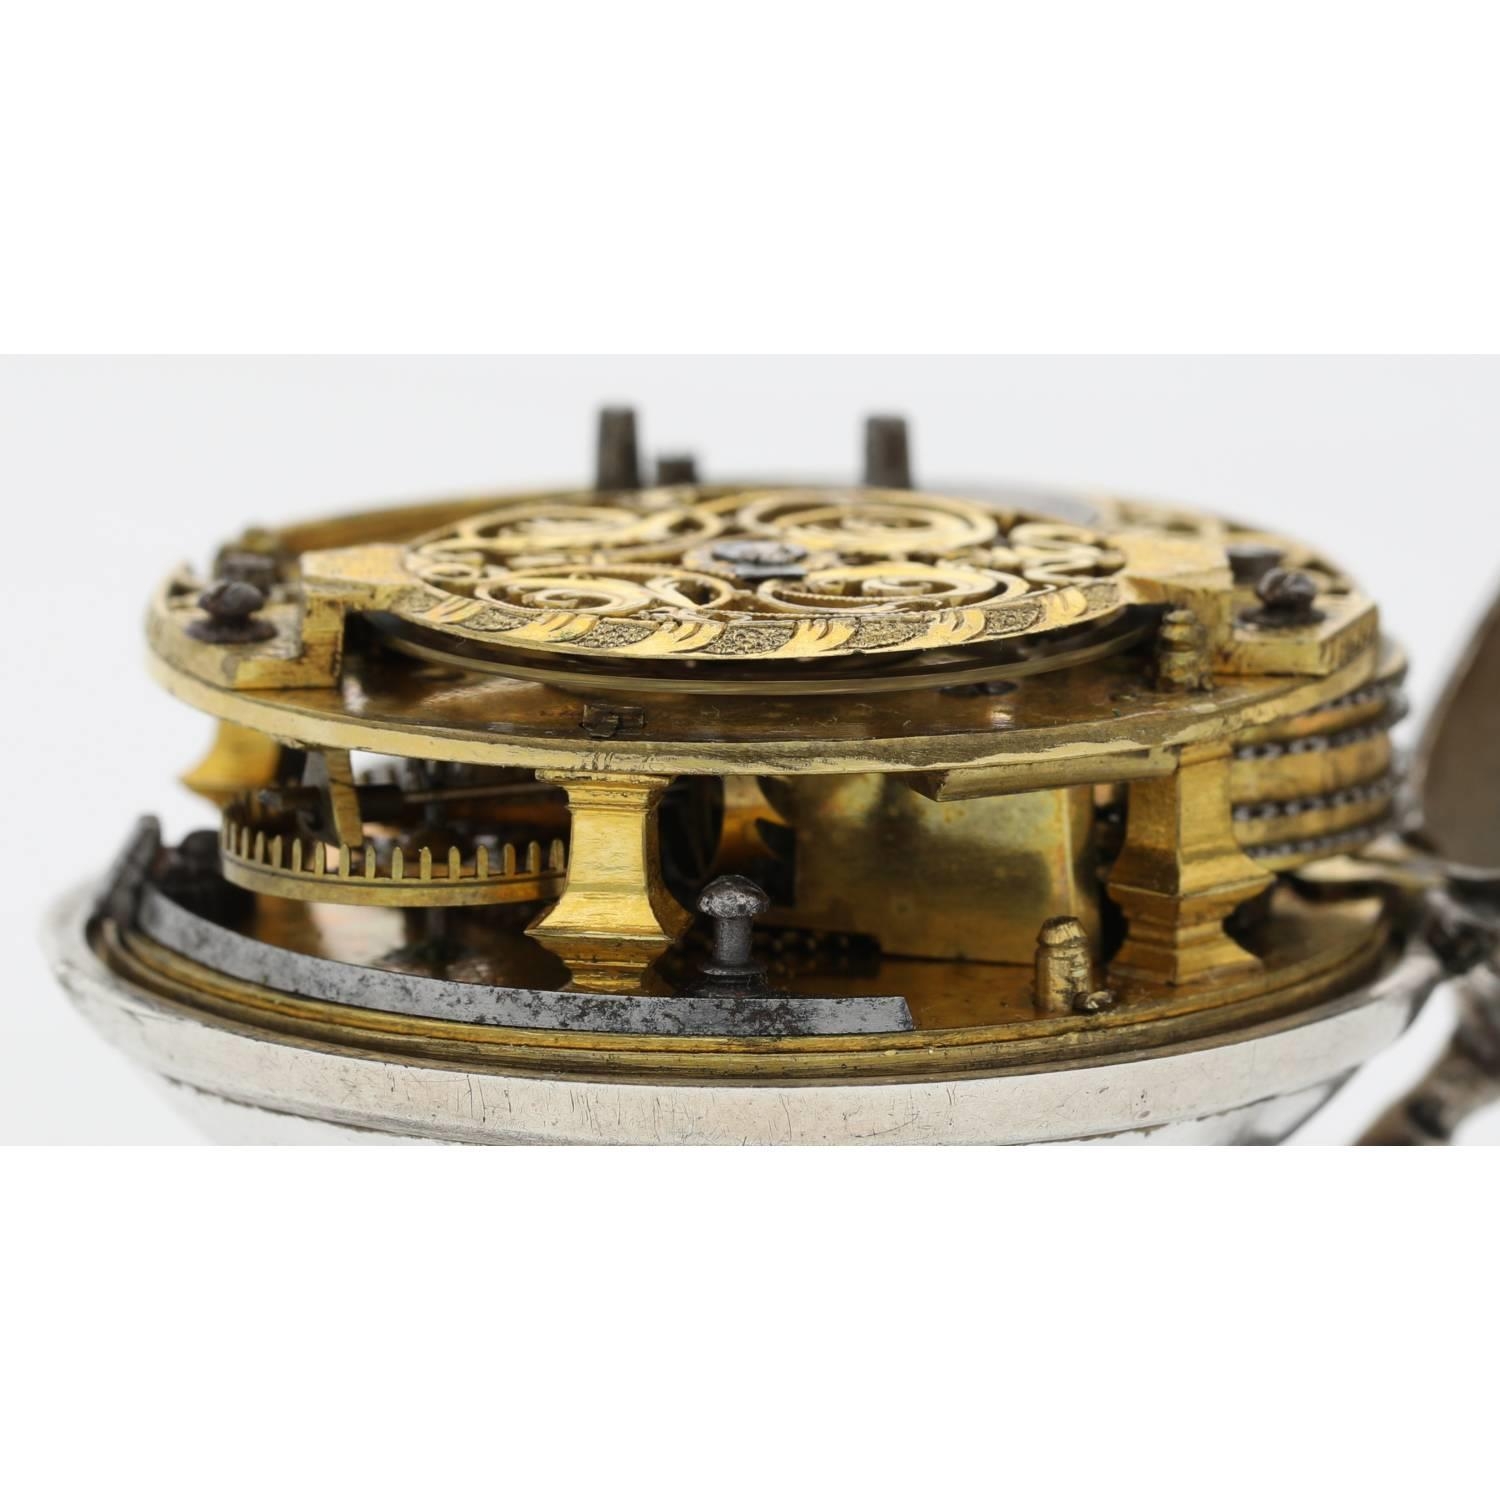 Charles Cabrier, London - 18th century silver pair case verge pocket watch, signed fusee movement, - Image 7 of 11